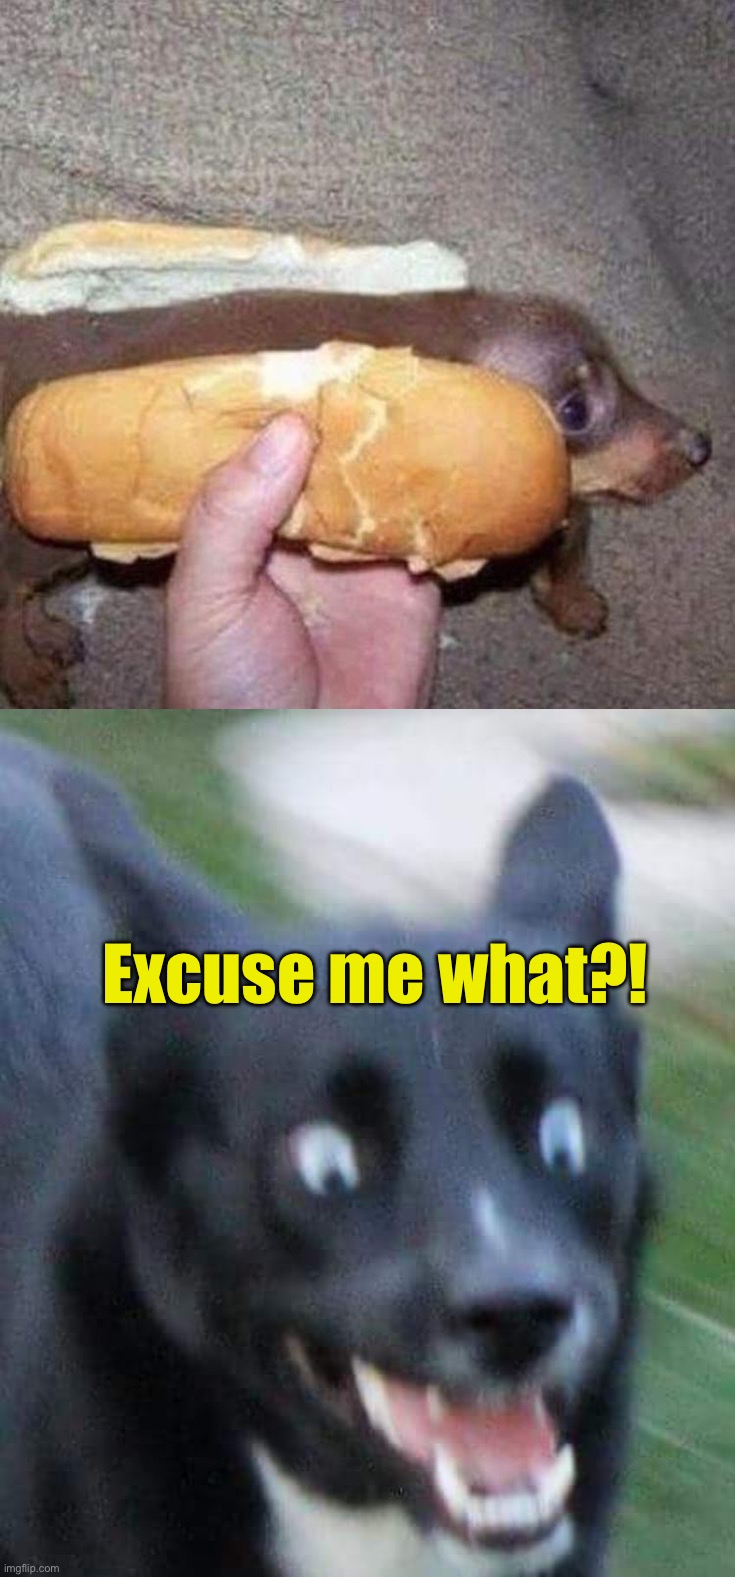 Hot-dog | Excuse me what?! | image tagged in scared doggo,memes,funny,cursed image | made w/ Imgflip meme maker